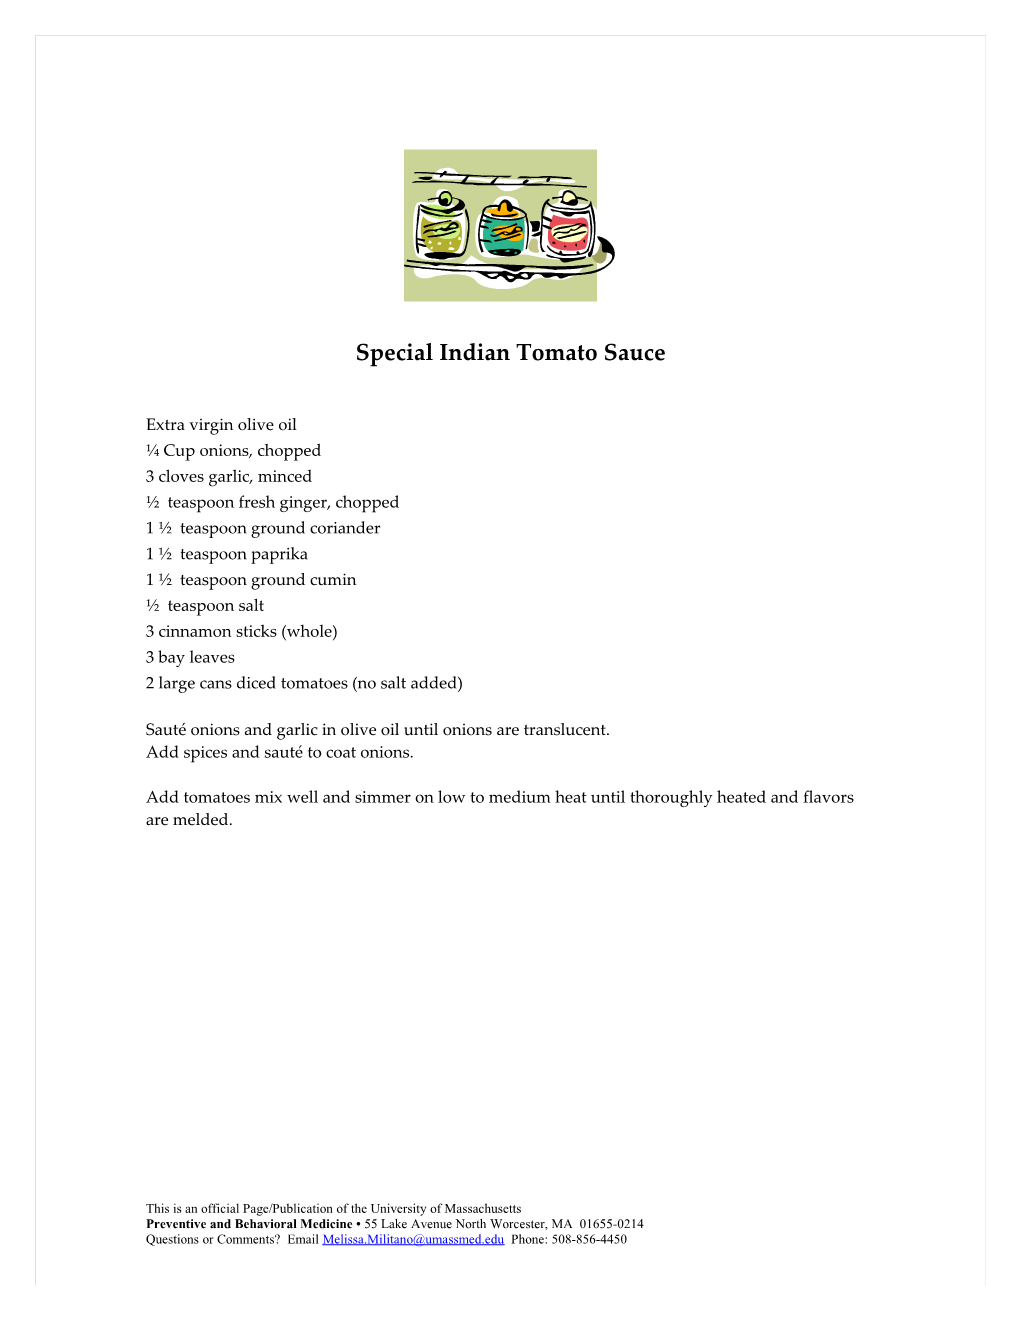 Special Indian Tomato Sauce